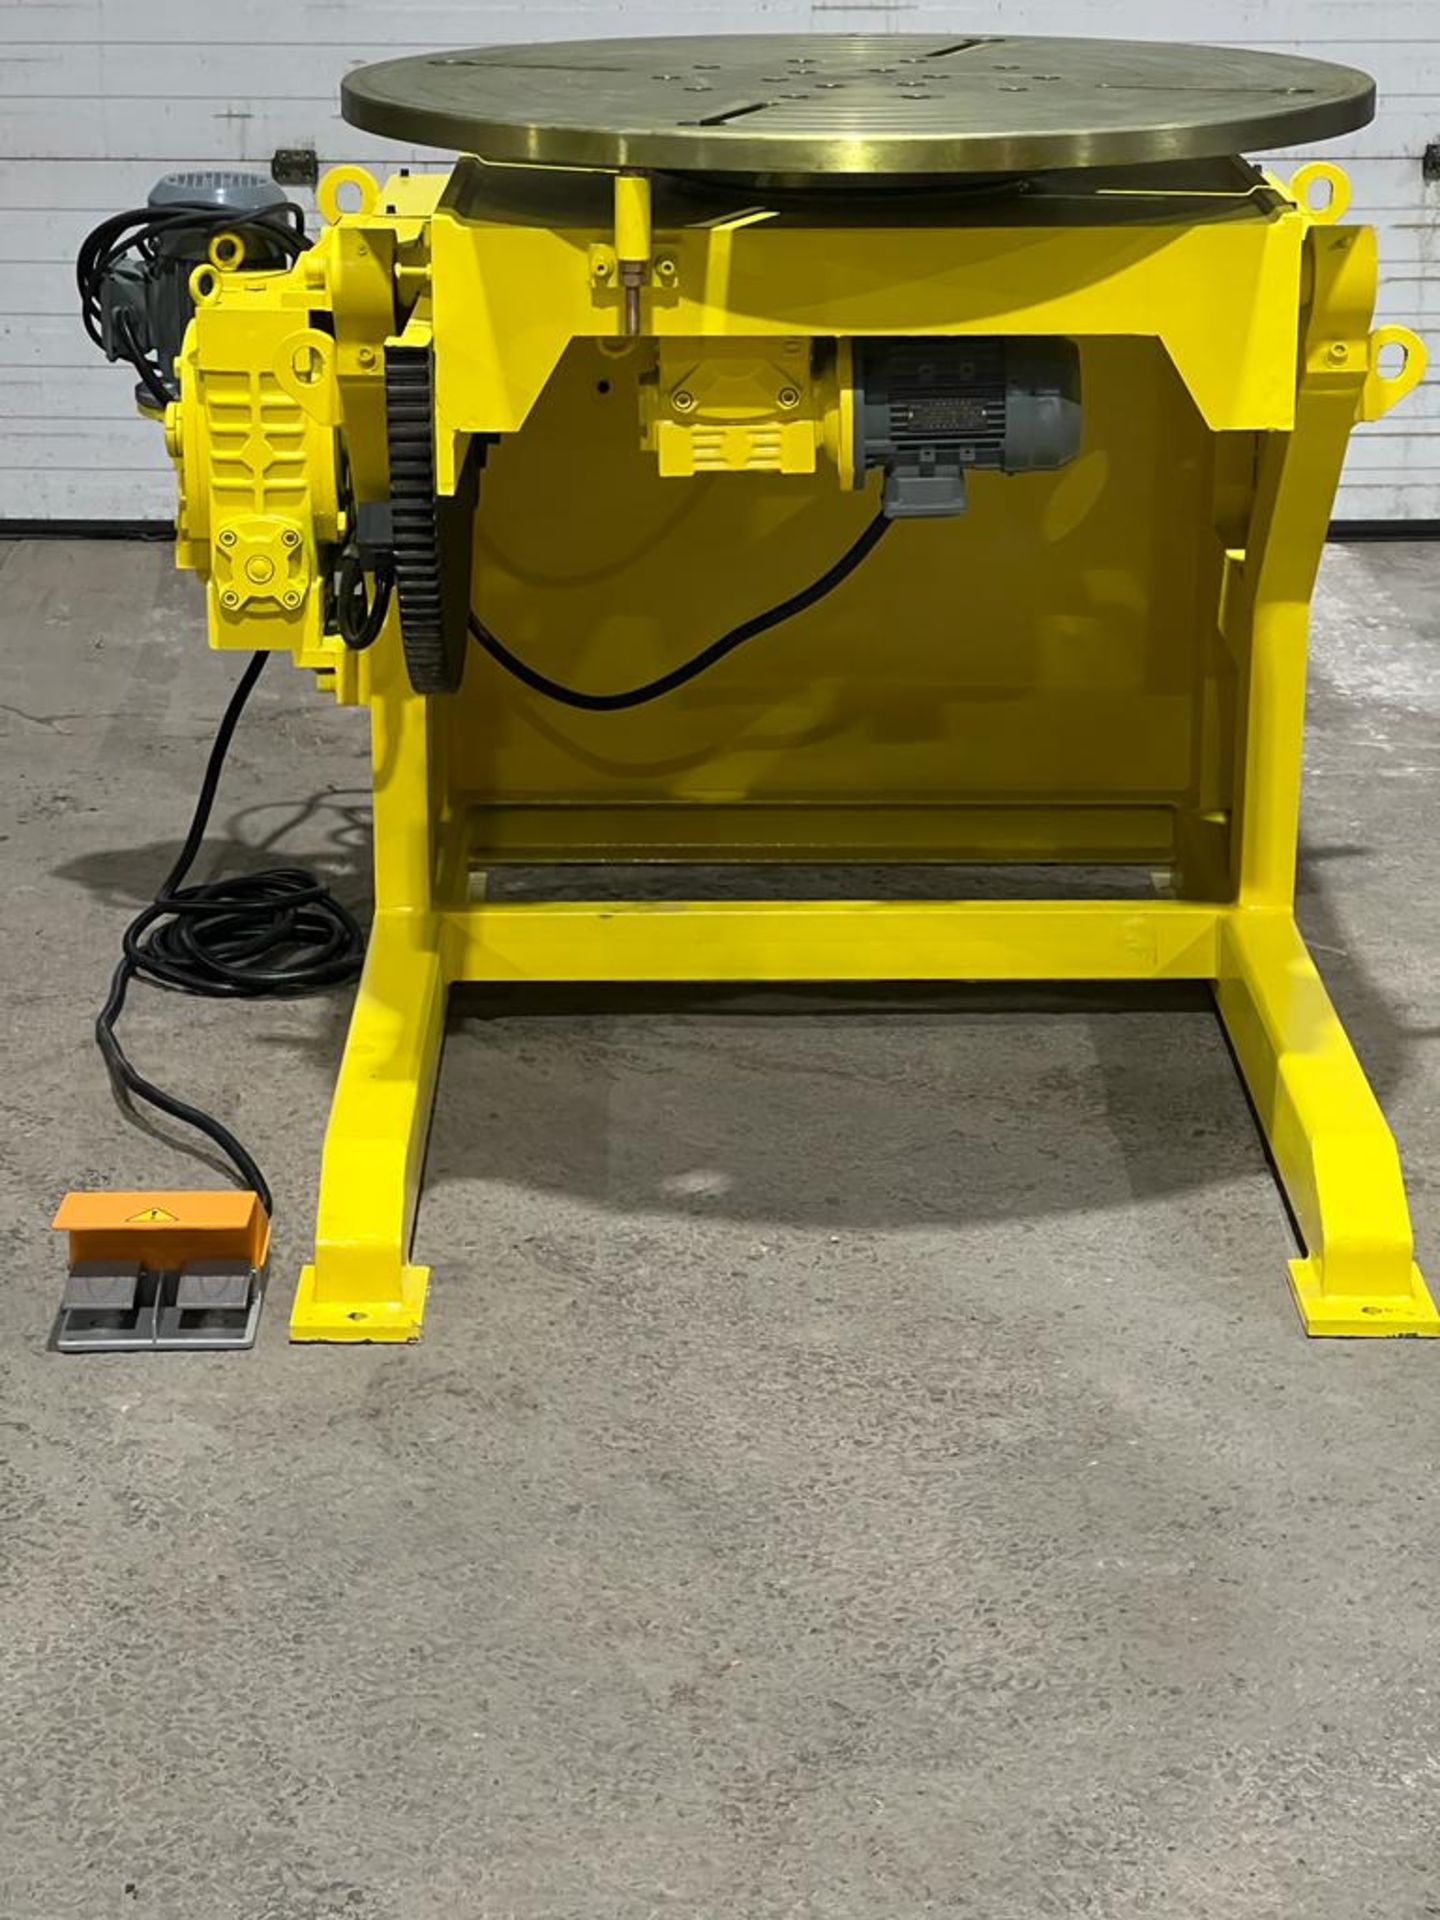 Verner model VD-2500 WELDING POSITIONER 1500lbs capacity - tilt and rotate with variable speed drive - Image 2 of 4